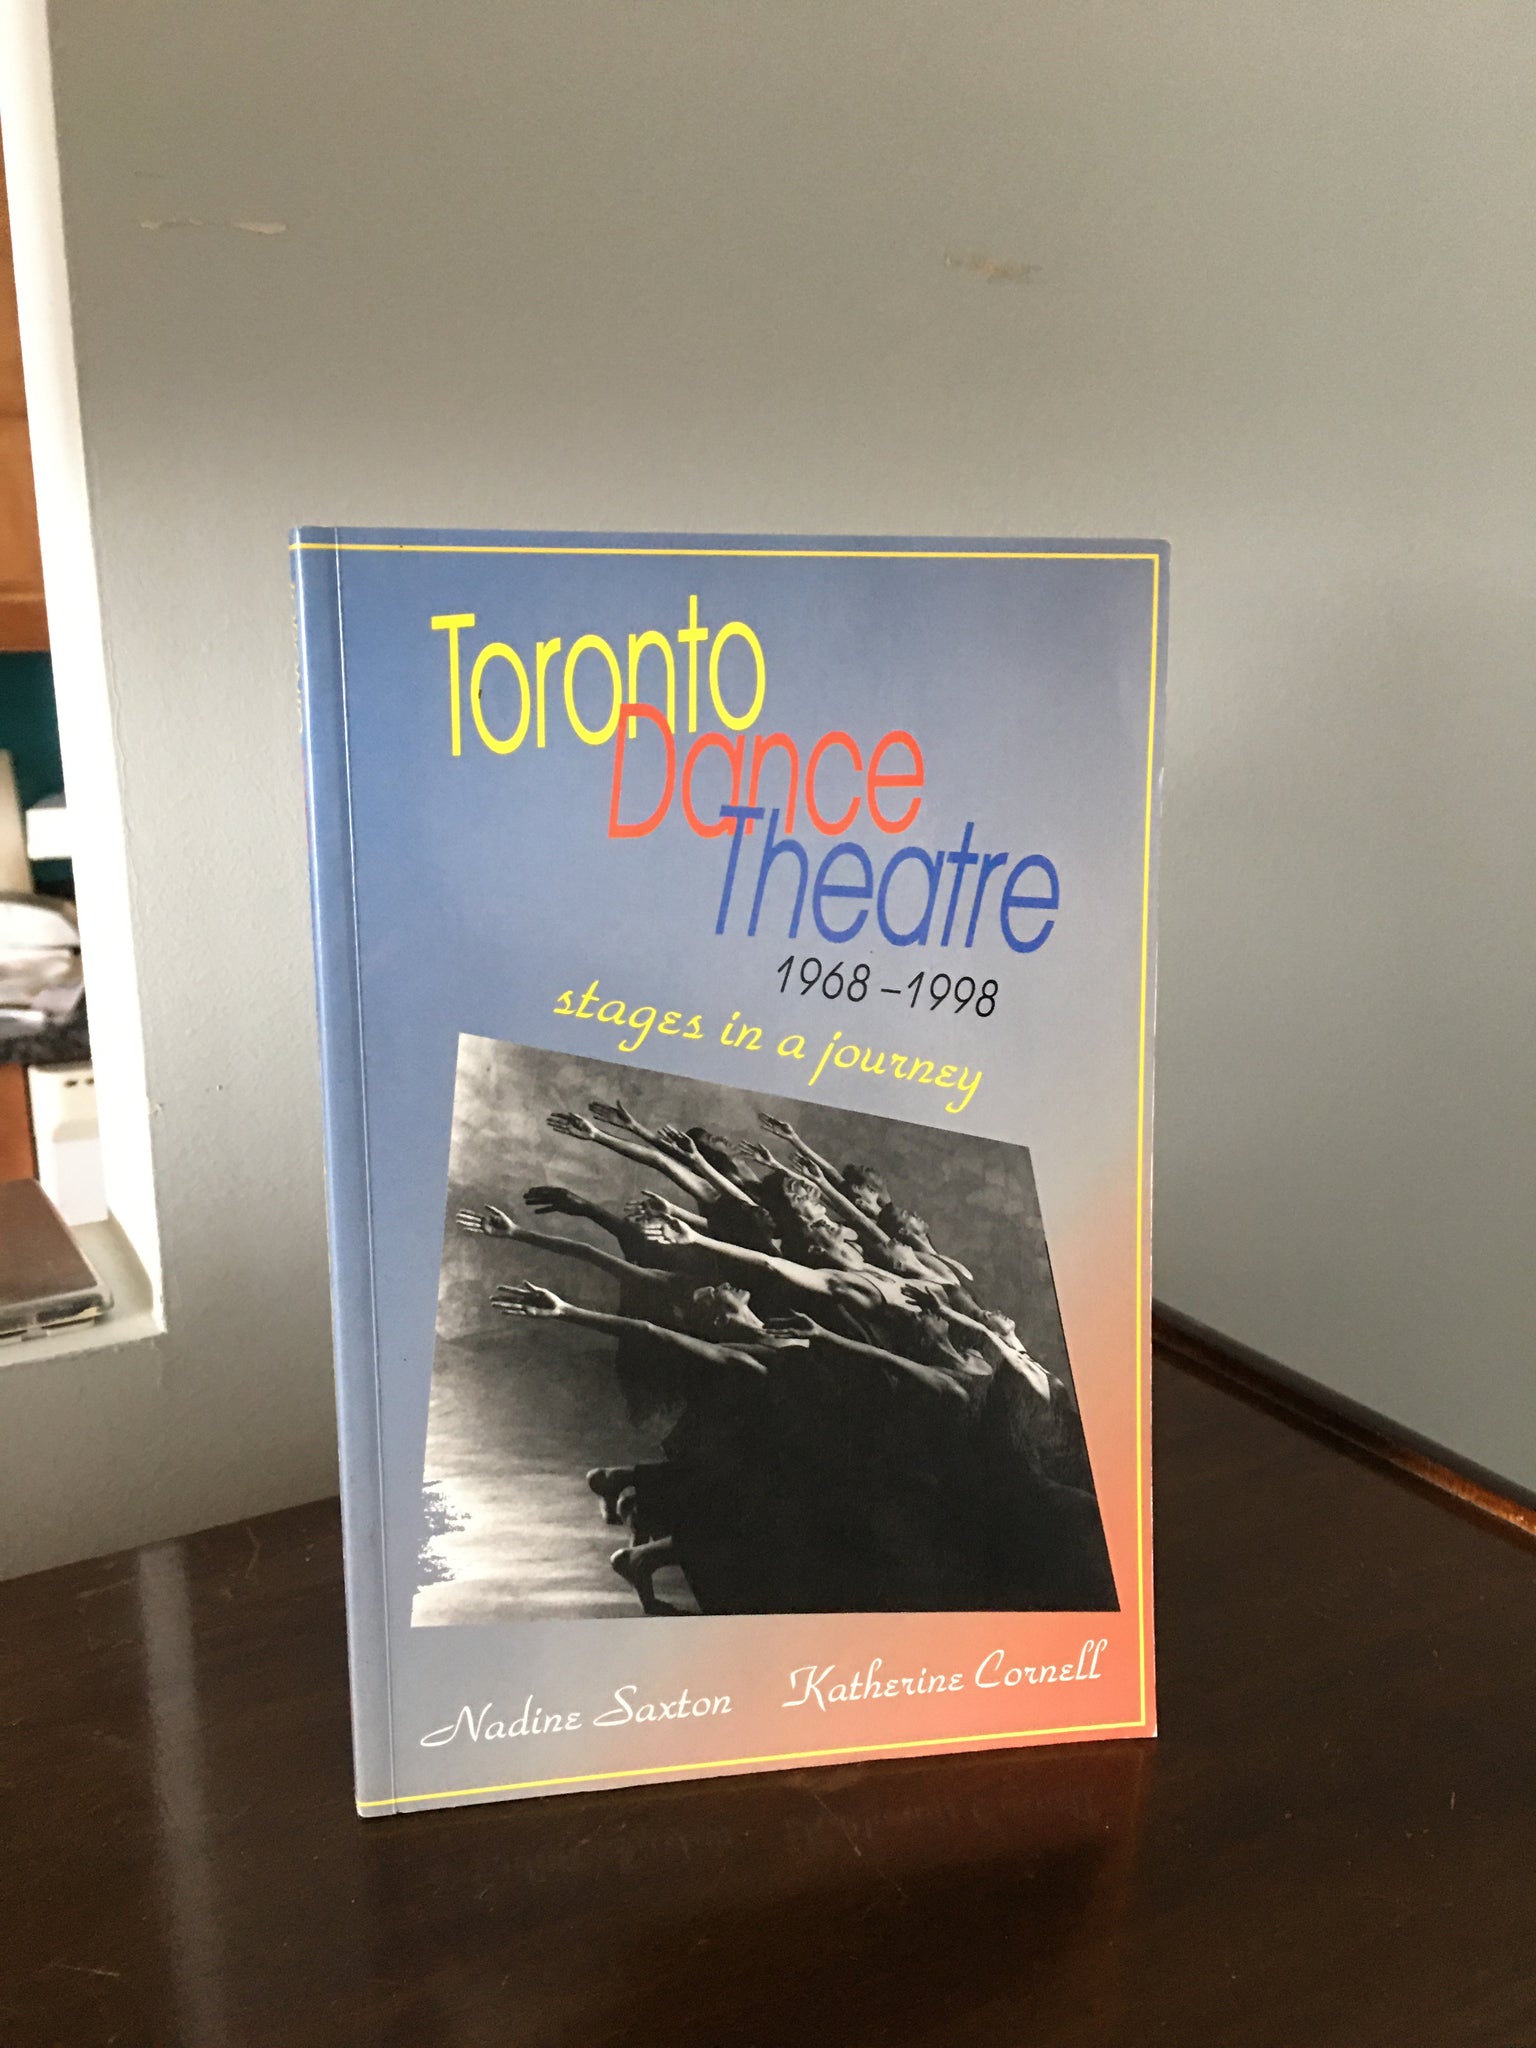 Toronto Dance Theatre 1968 - 1998 stages in a journey